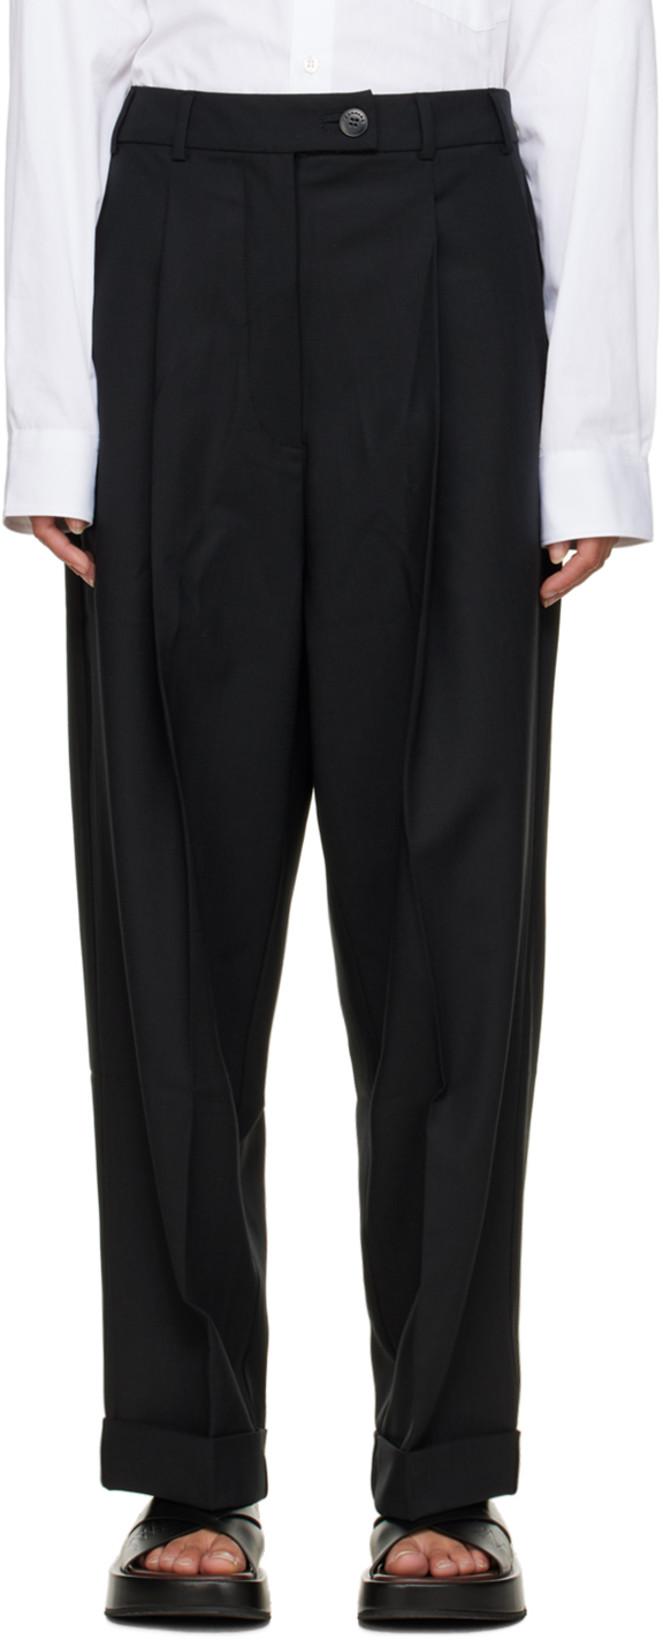 Black Tailoring Trousers by CORDERA